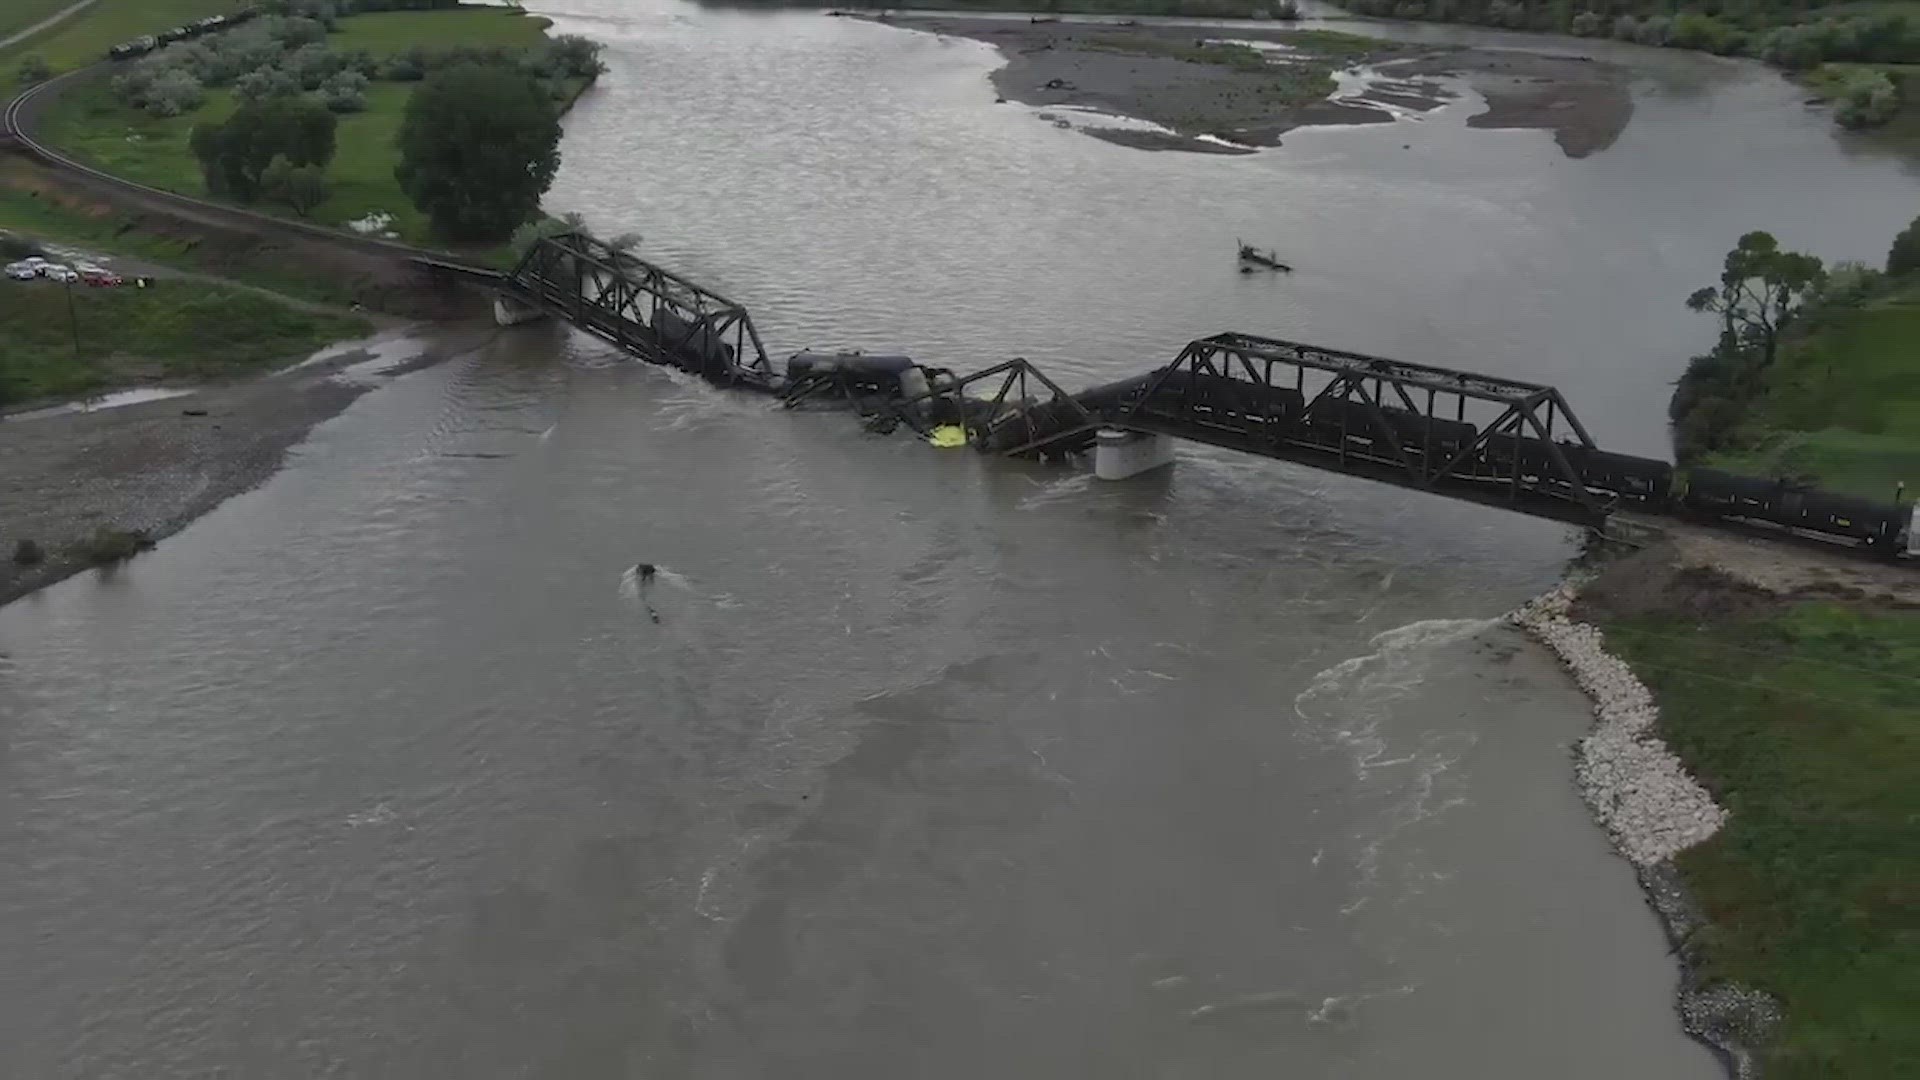 Images from the scene revealed that a portion of the bridge spanning the river had collapsed. (KTVQ and cleared user video)